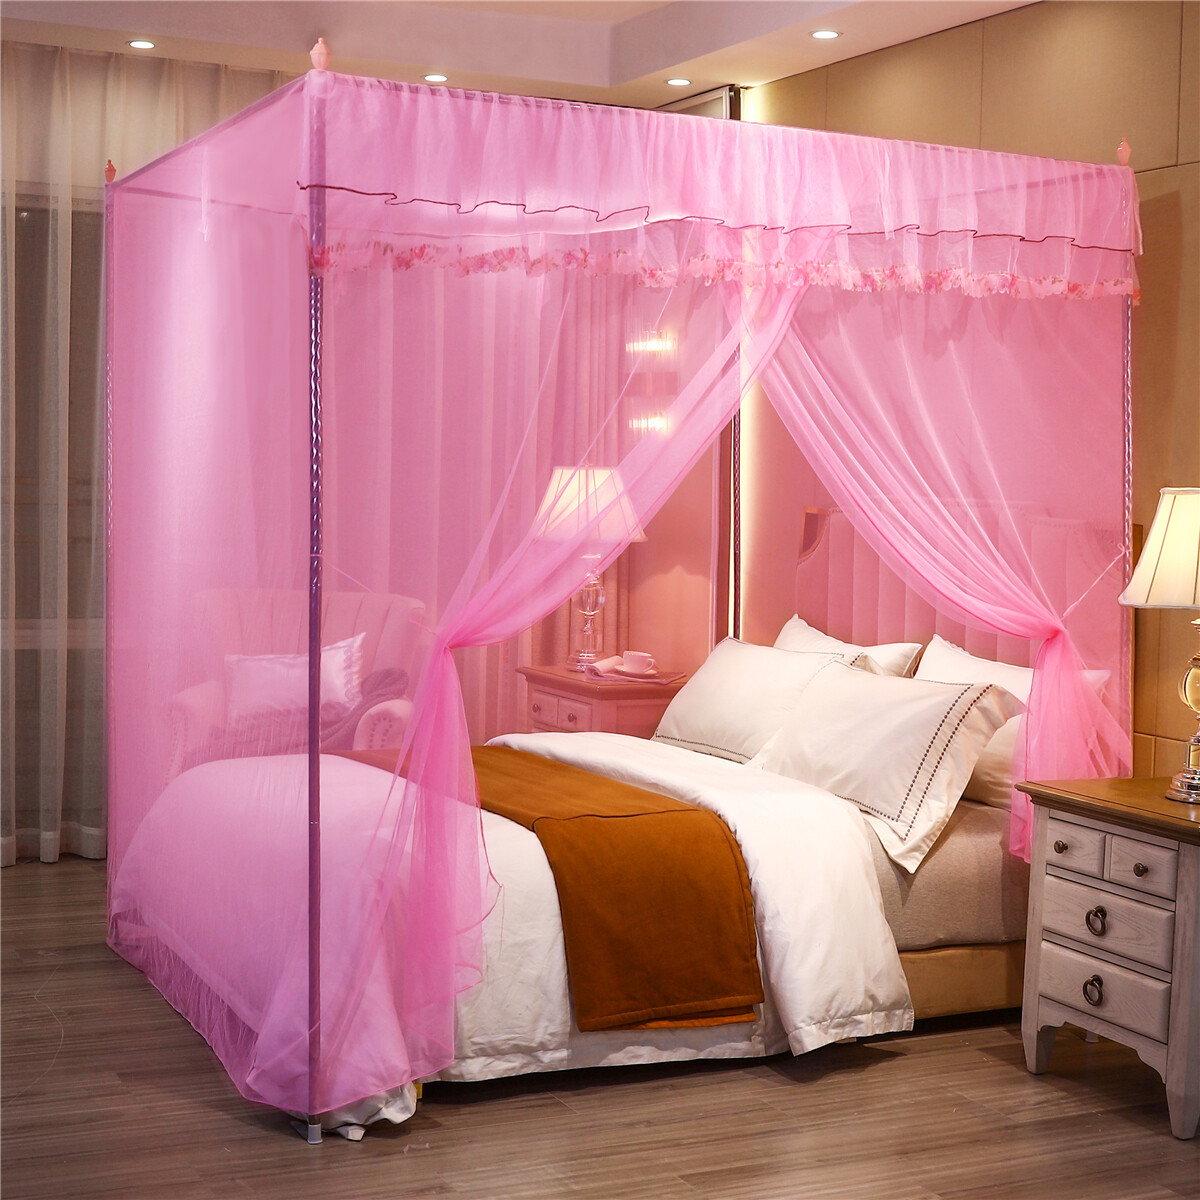 Doubleer Mosquito Net for Bed 4 Corners Fine Mesh Bedding Canopy Netting Full Sizes Square Curtains Bedding Home Decor 